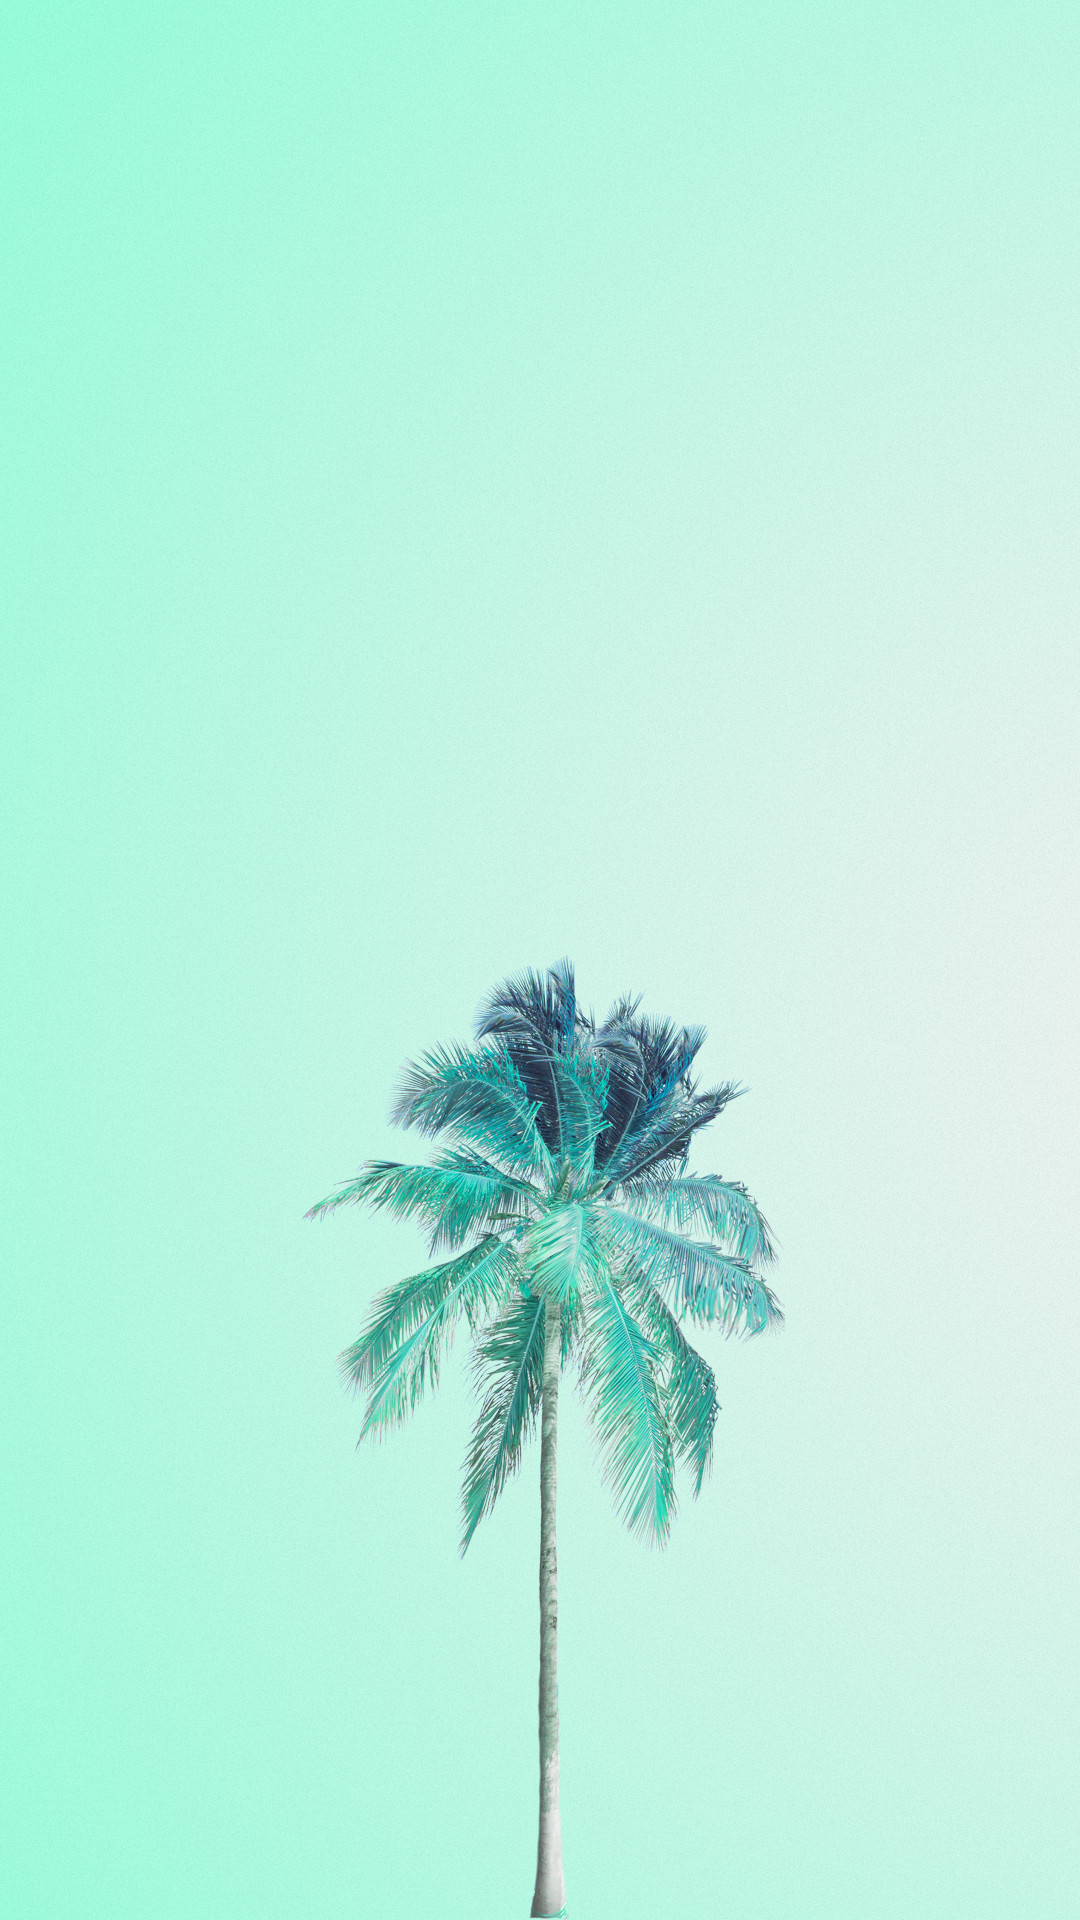 1080x1920 Mind Green & The lonely PalmTree